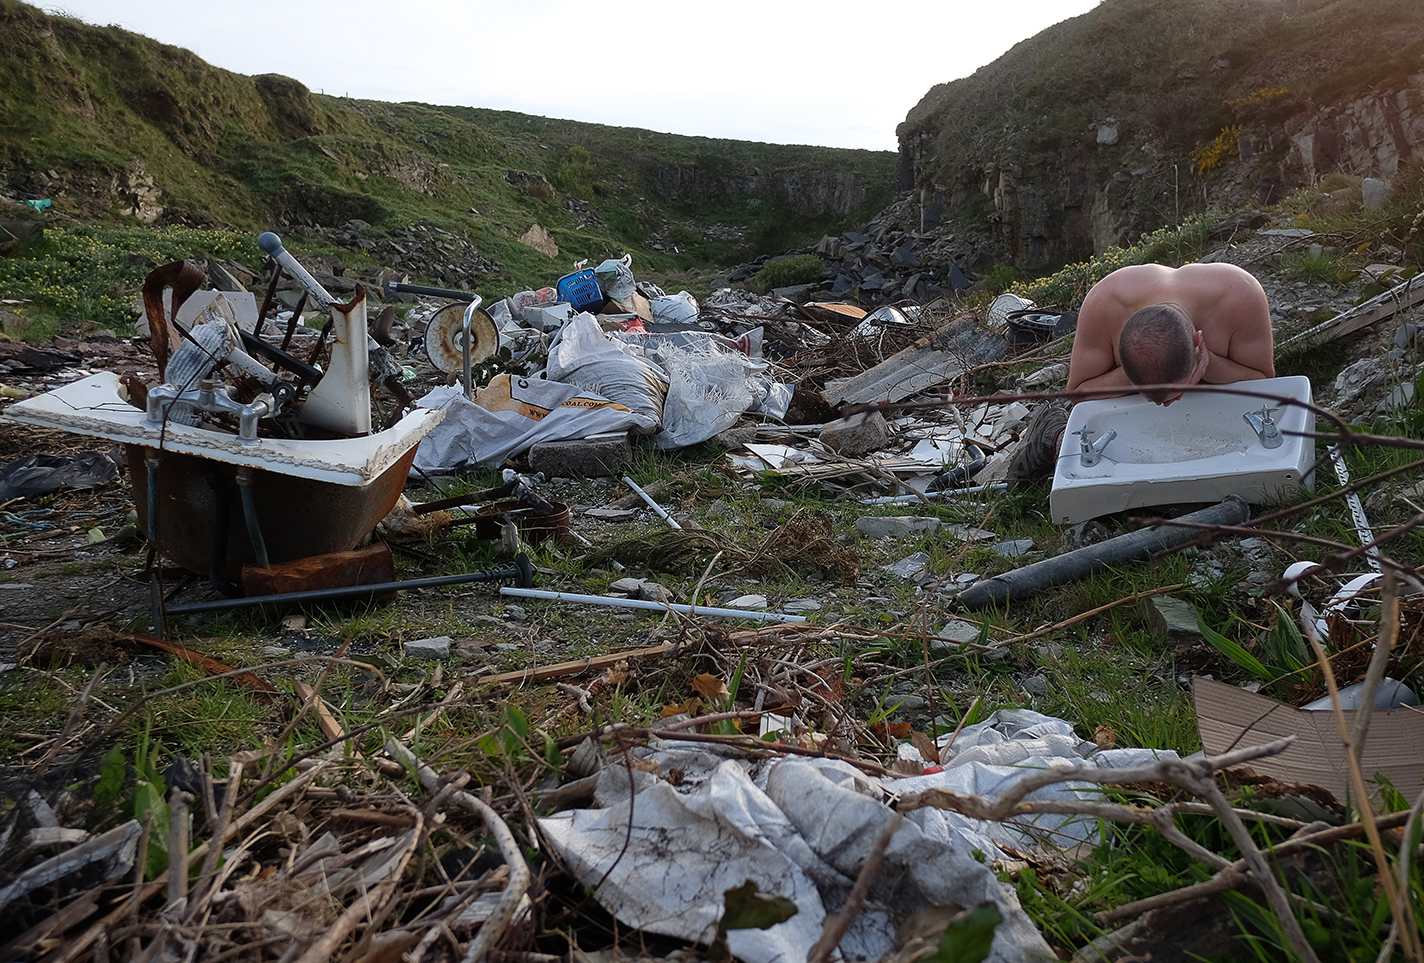 William Bock (First Prize) May Daily #4 Illegal Dump, Ireland